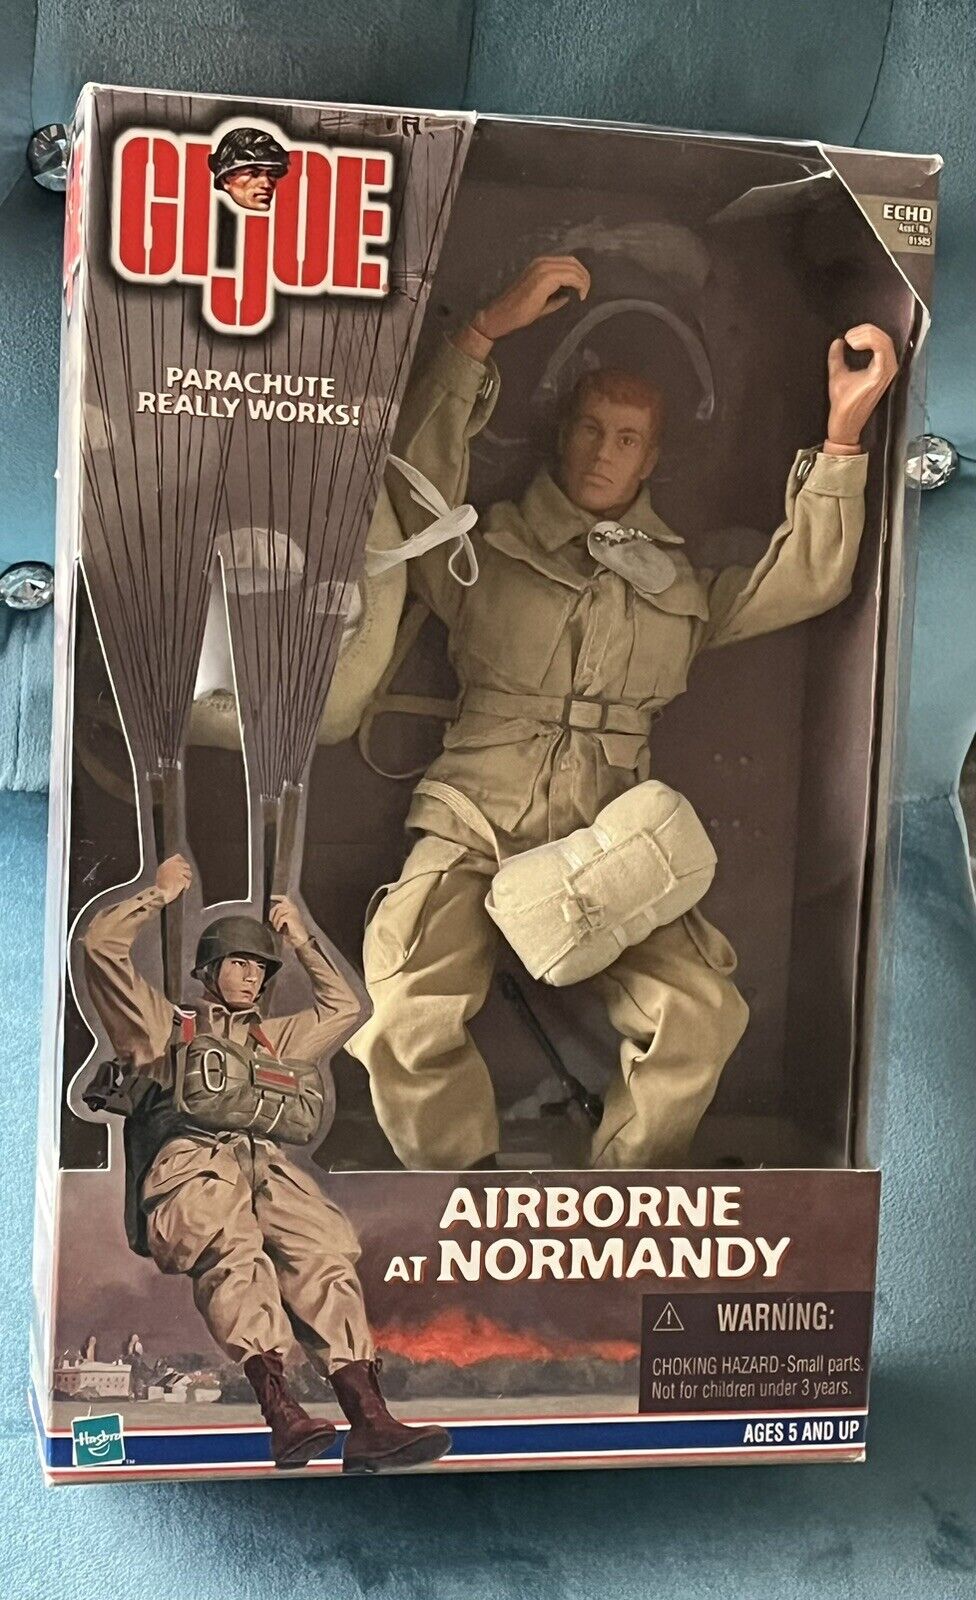 1999 Hasbro GI Joe Classic Collection AIRBORNE AT NORMANDY 12” Figure, Red Hair